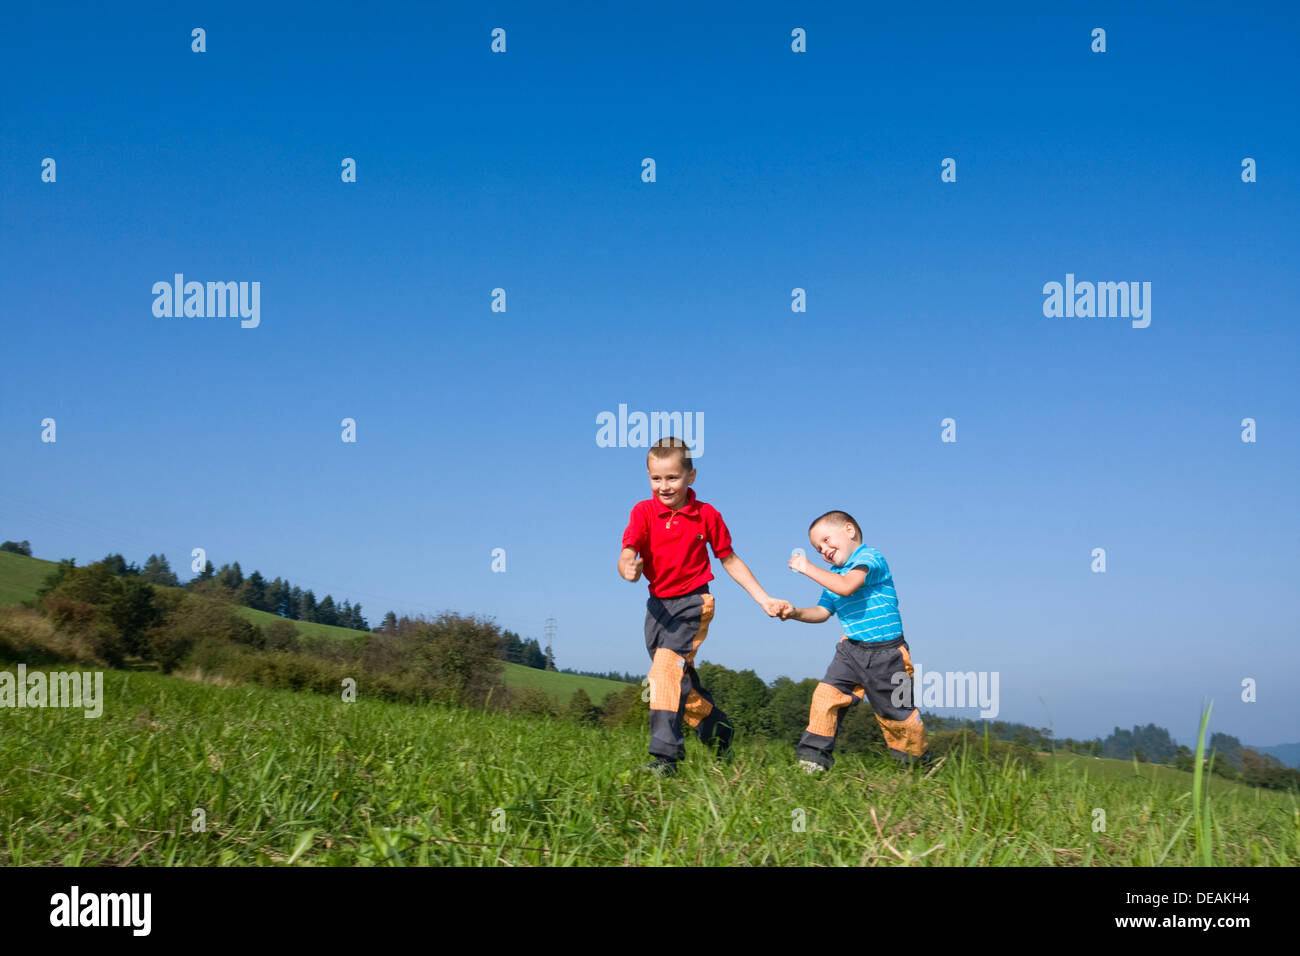 Boys, 6 and 4 years, running over a meadow Stock Photo